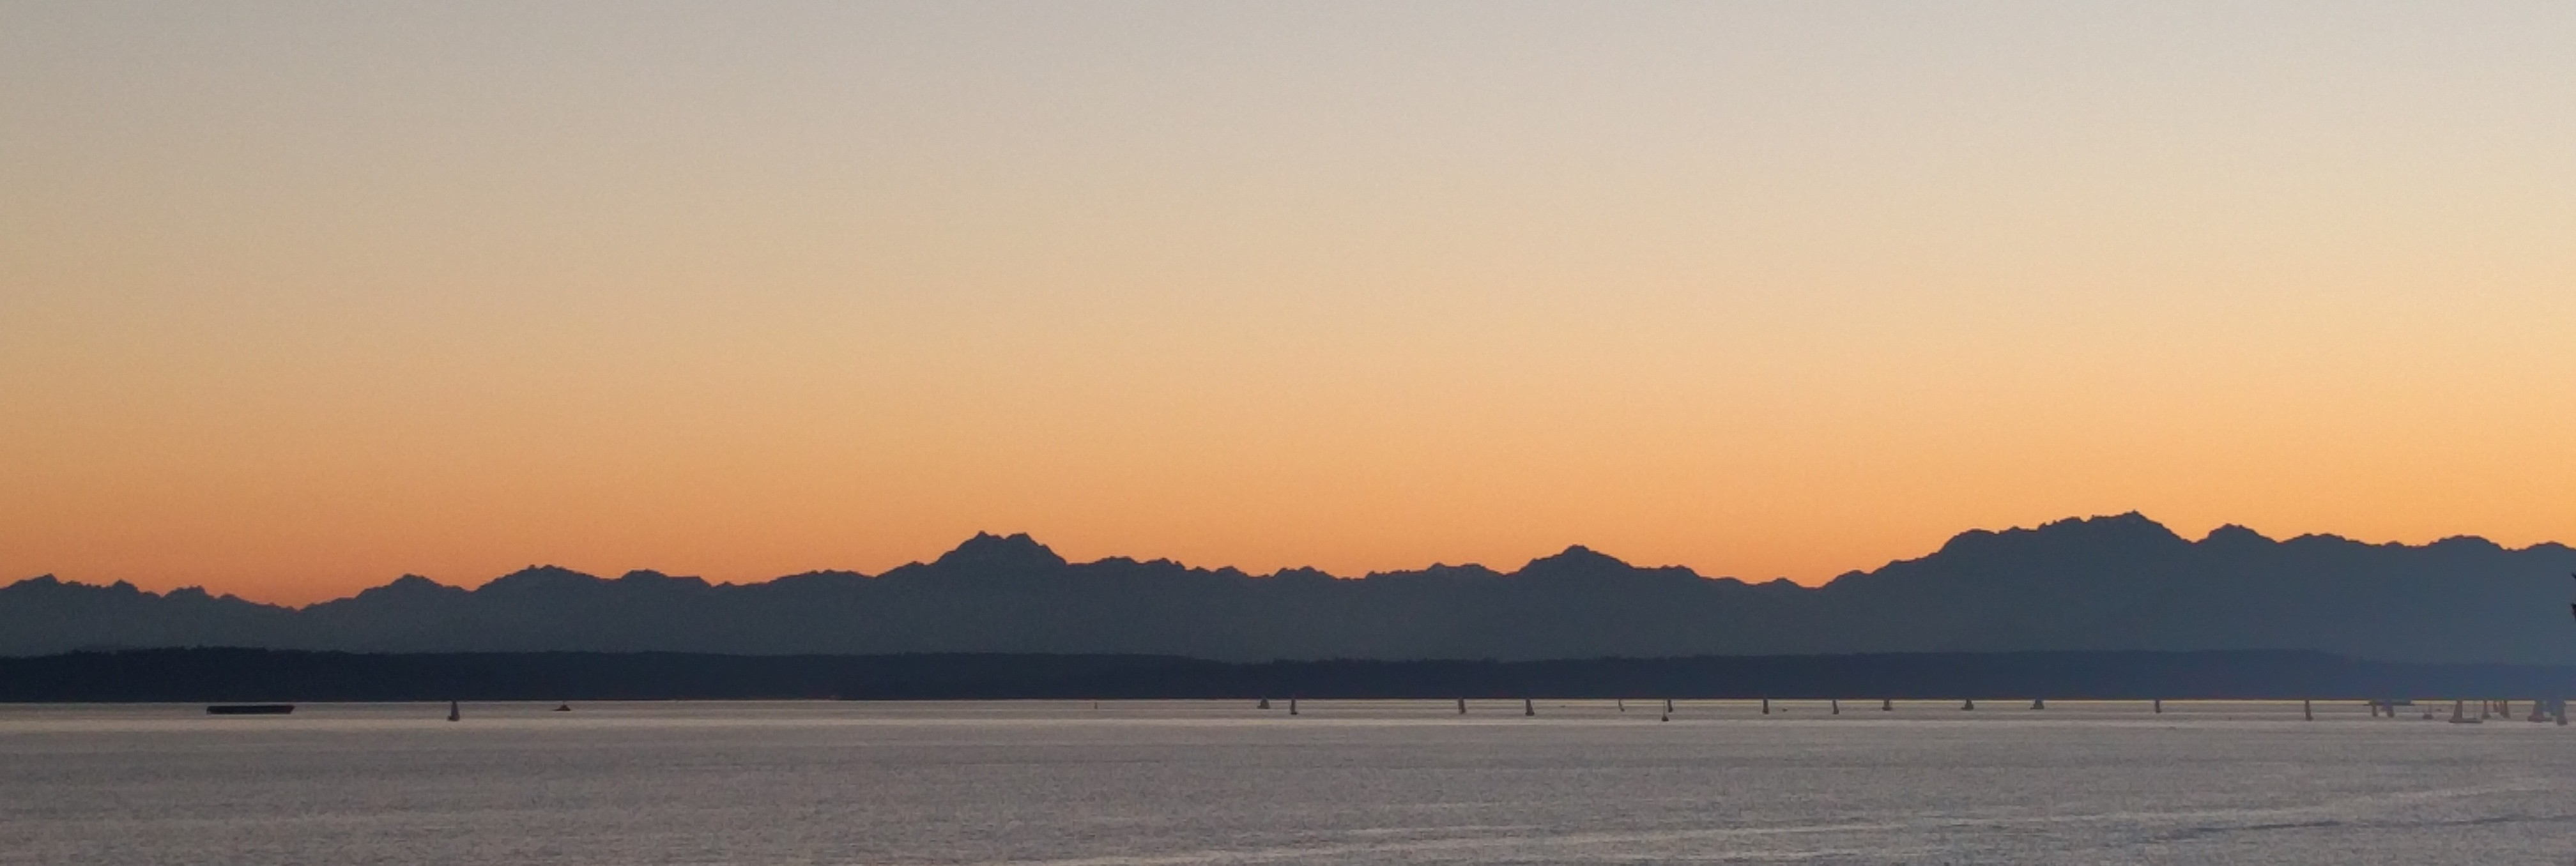 Puget Sound and Olympics at days end